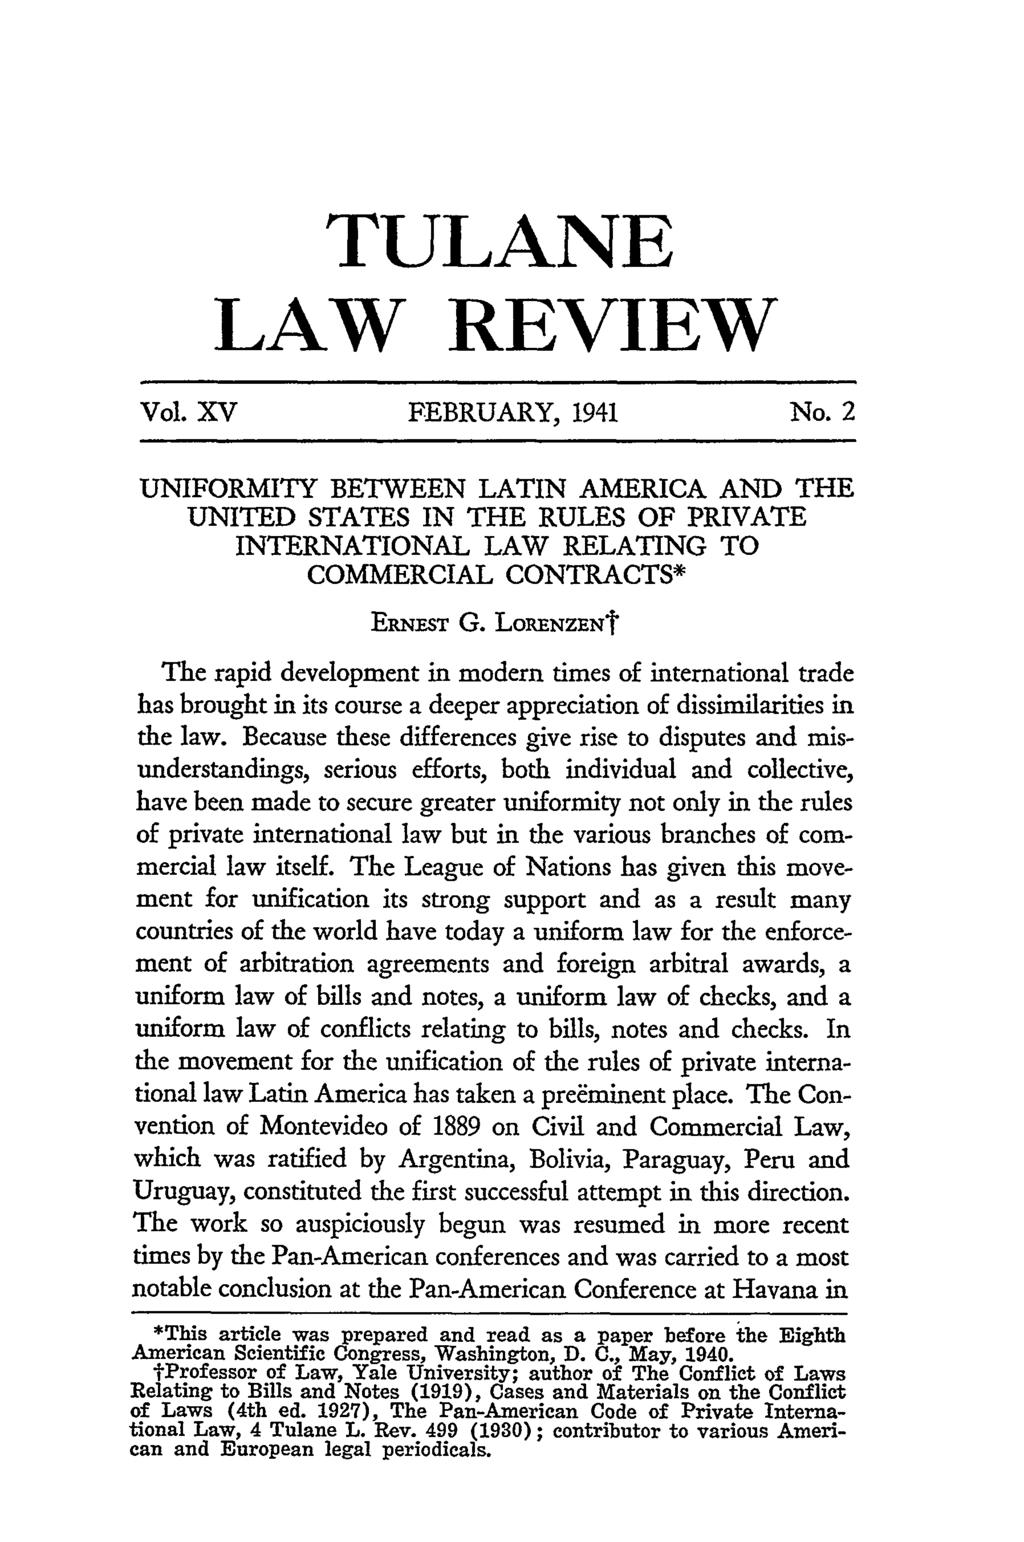 TULANE LAW REVIEW Vol. XV FEBRUARY, 1941 No.2 UNIFORMITY BETWEEN LATIN AMERICA AND THE UNITED STATES IN THE RULES OF PRIVATE INTERNATIONAL LAW RELATING TO COMMERCIAL CONTRACTS* ERNEST G.